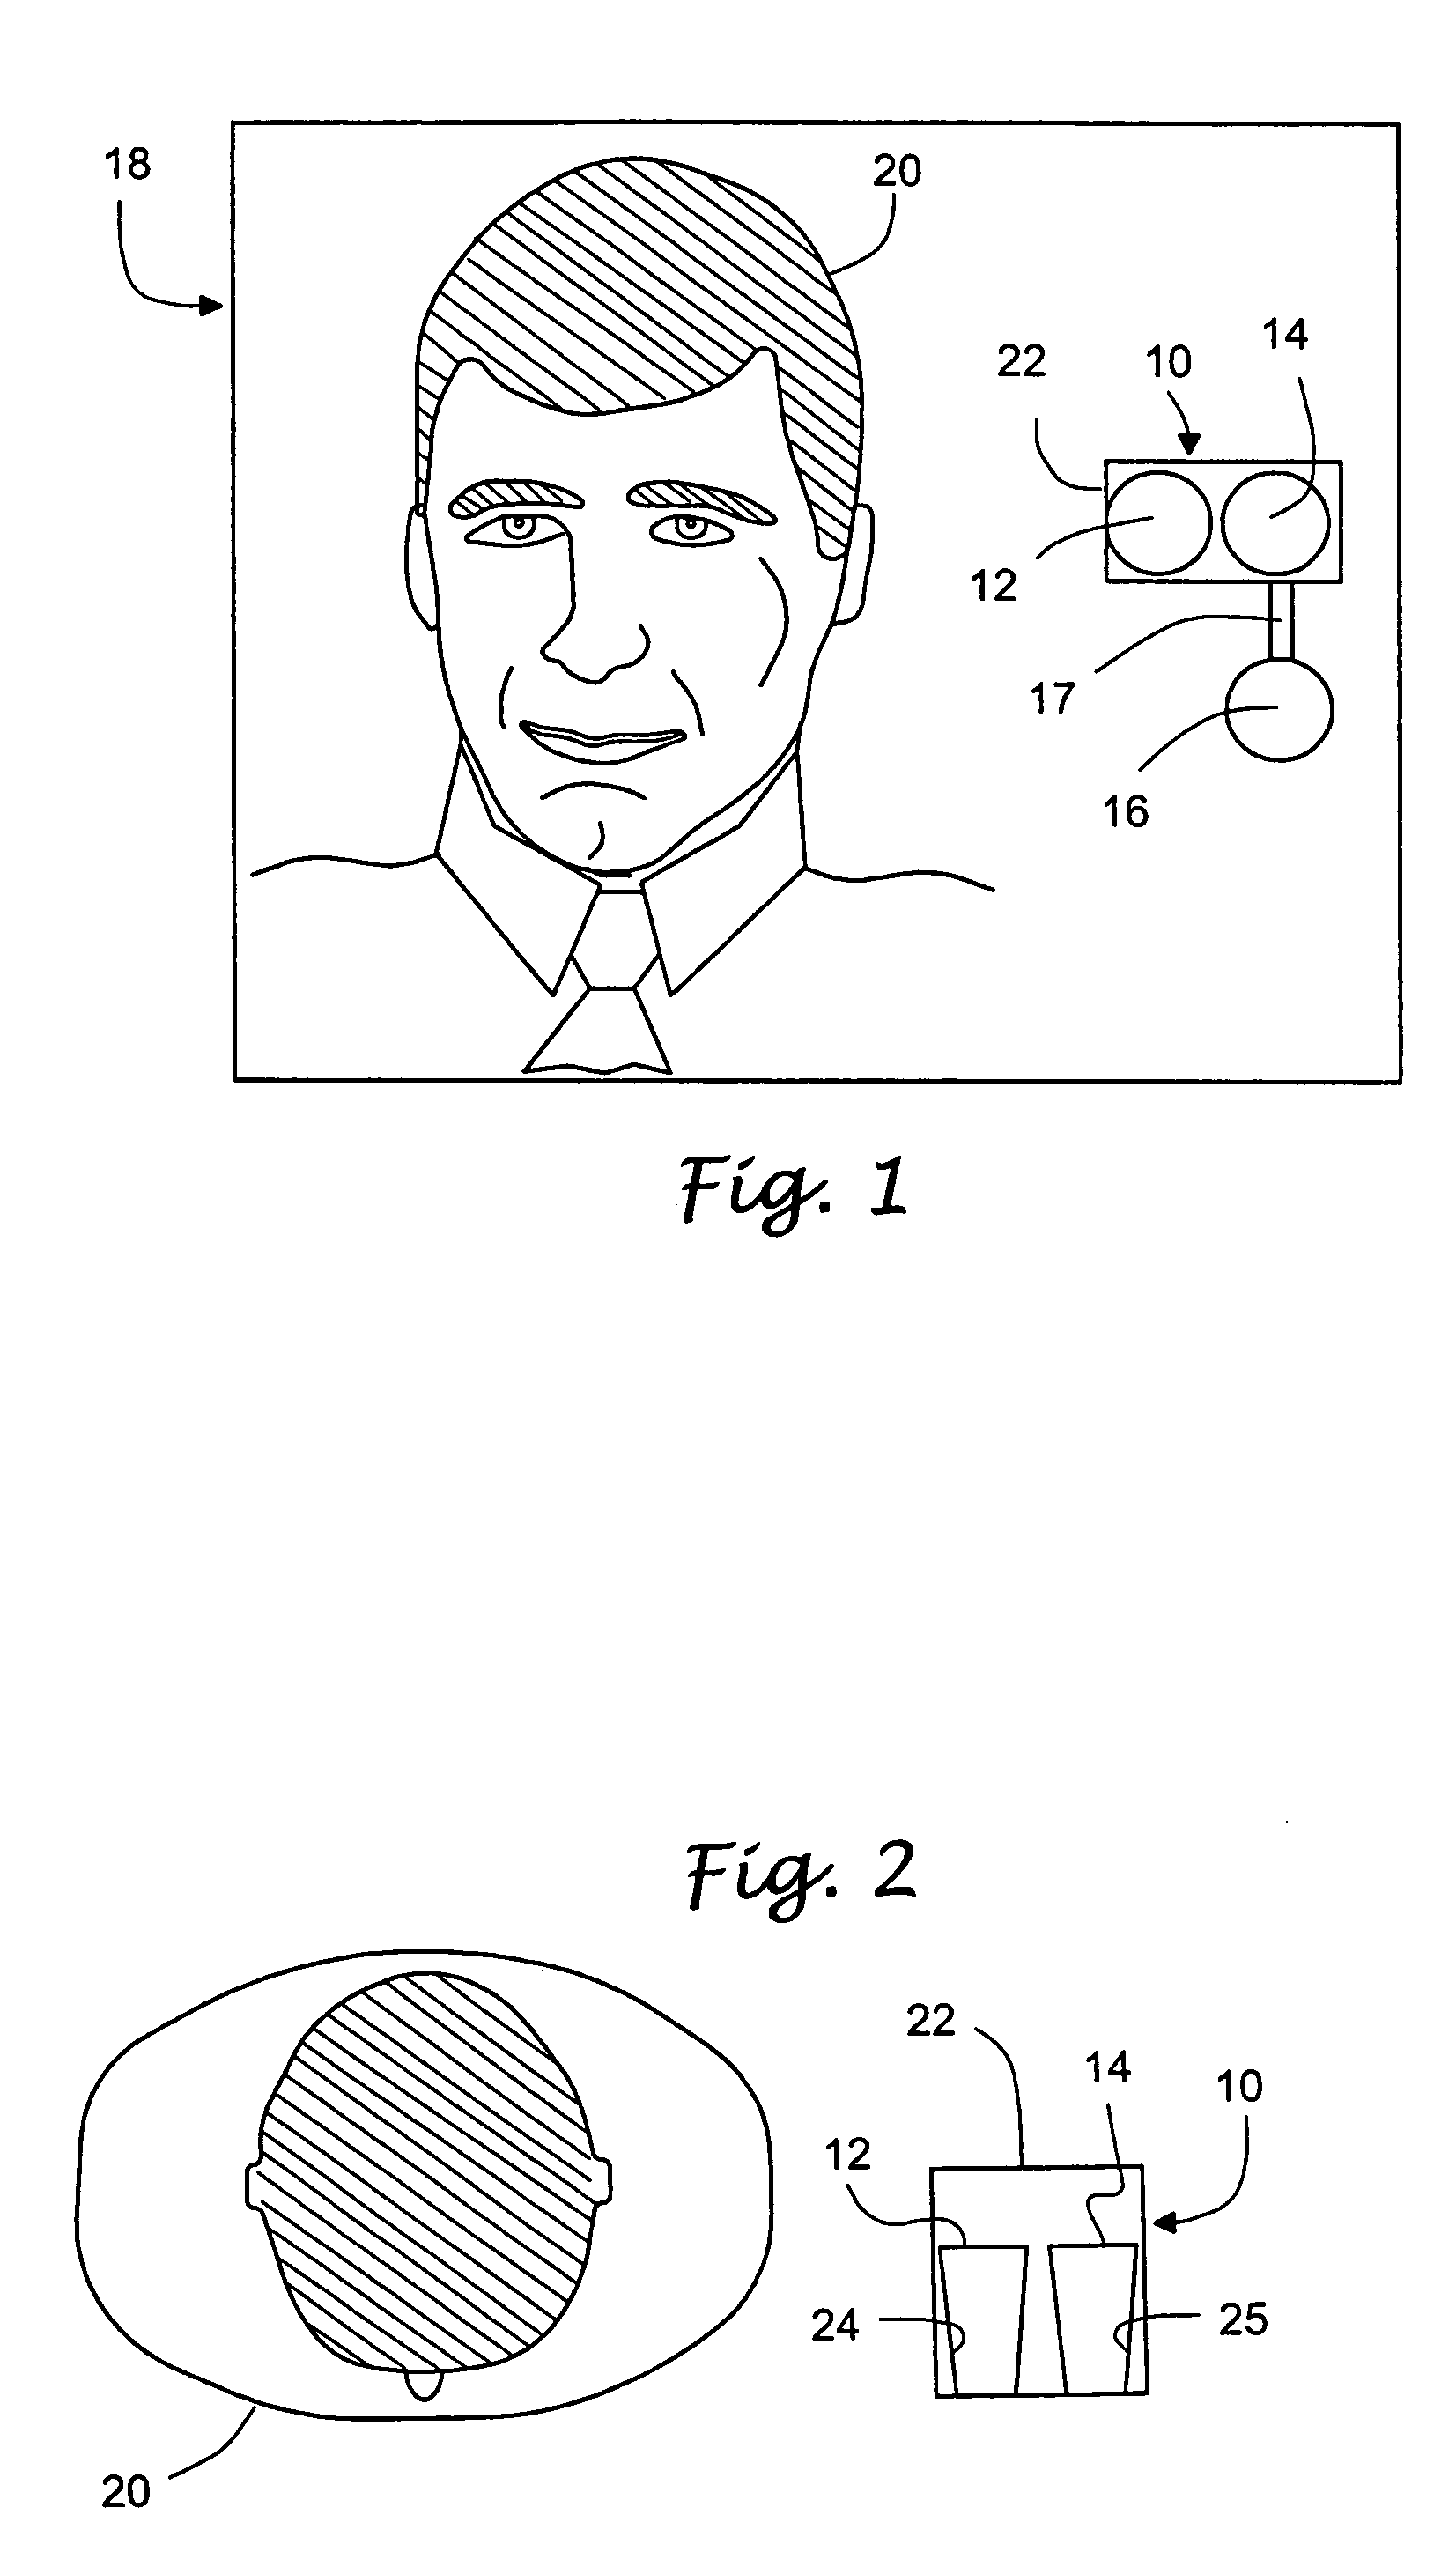 Methods and apparatus for a remote, noninvasive technique to detect core body temperature in a subject via thermal imaging